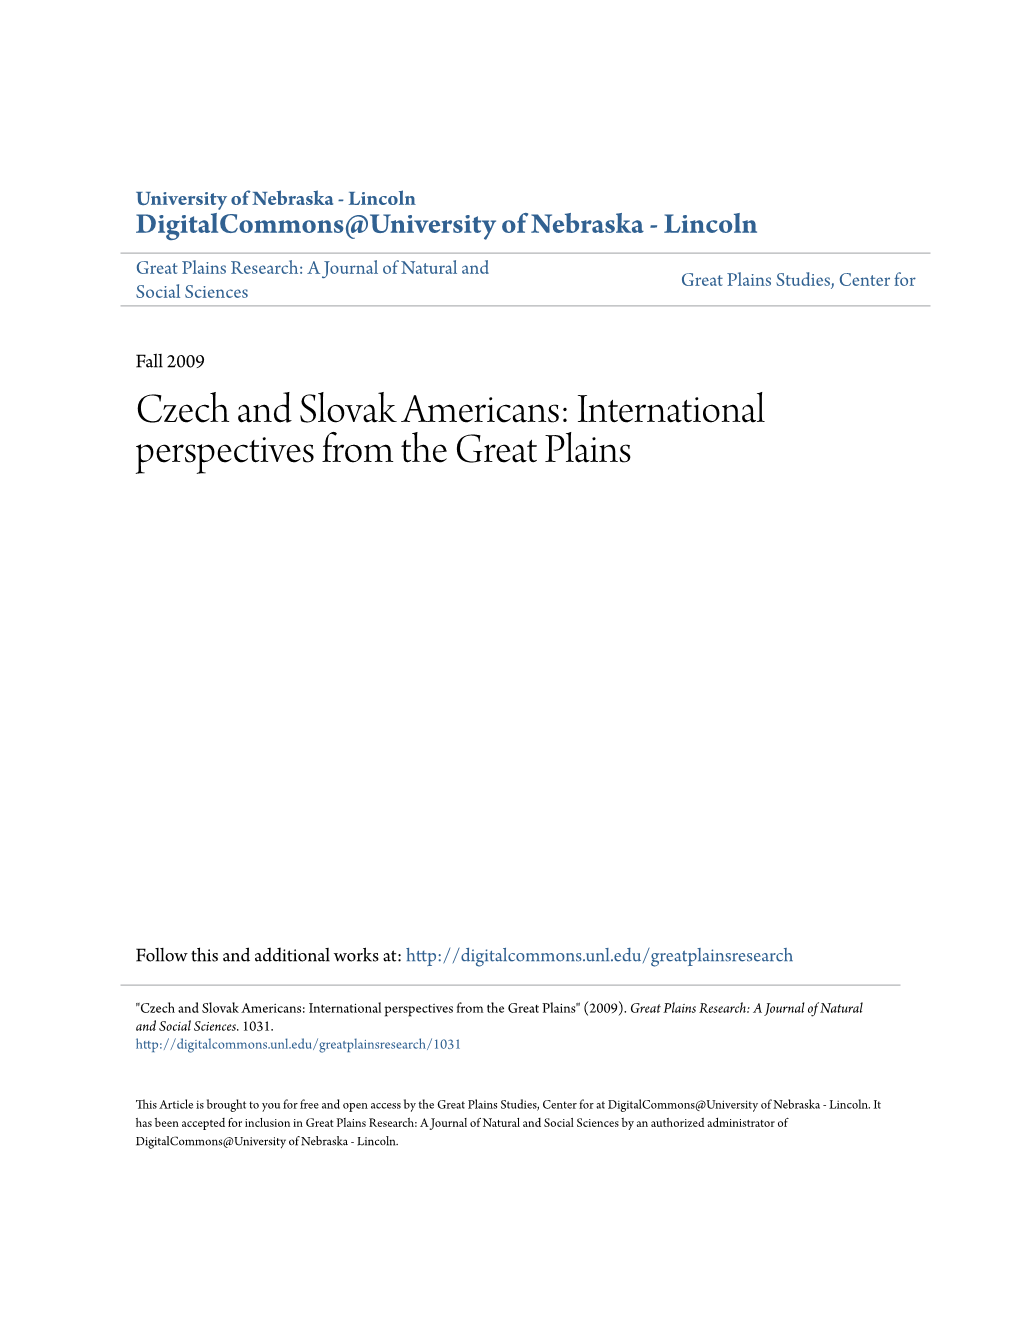 Czech and Slovak Americans: International Perspectives from the Great Plains